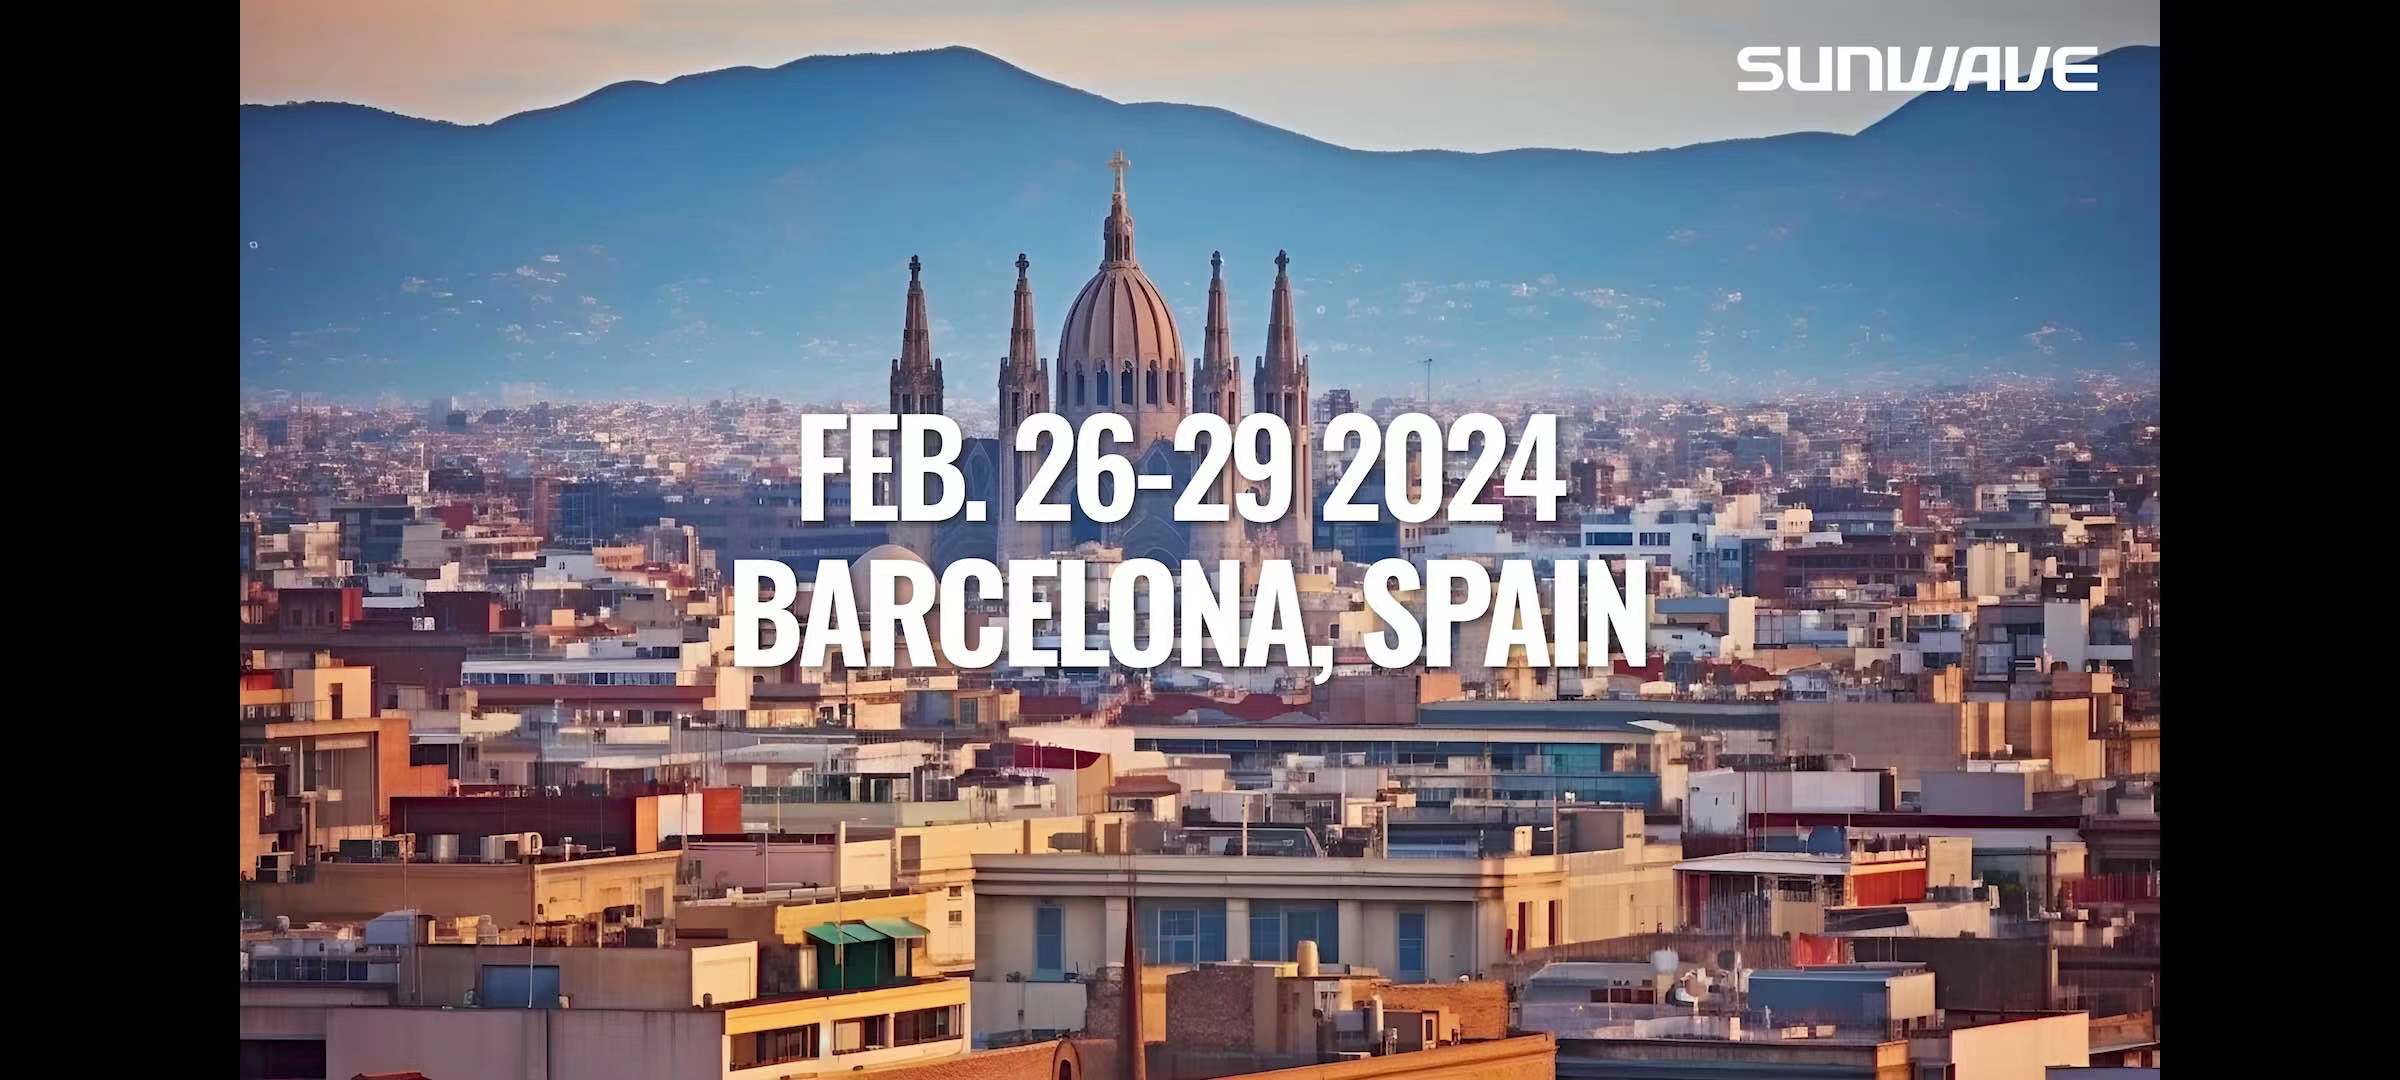 Welcome to Visit Sunwave at MWC2024